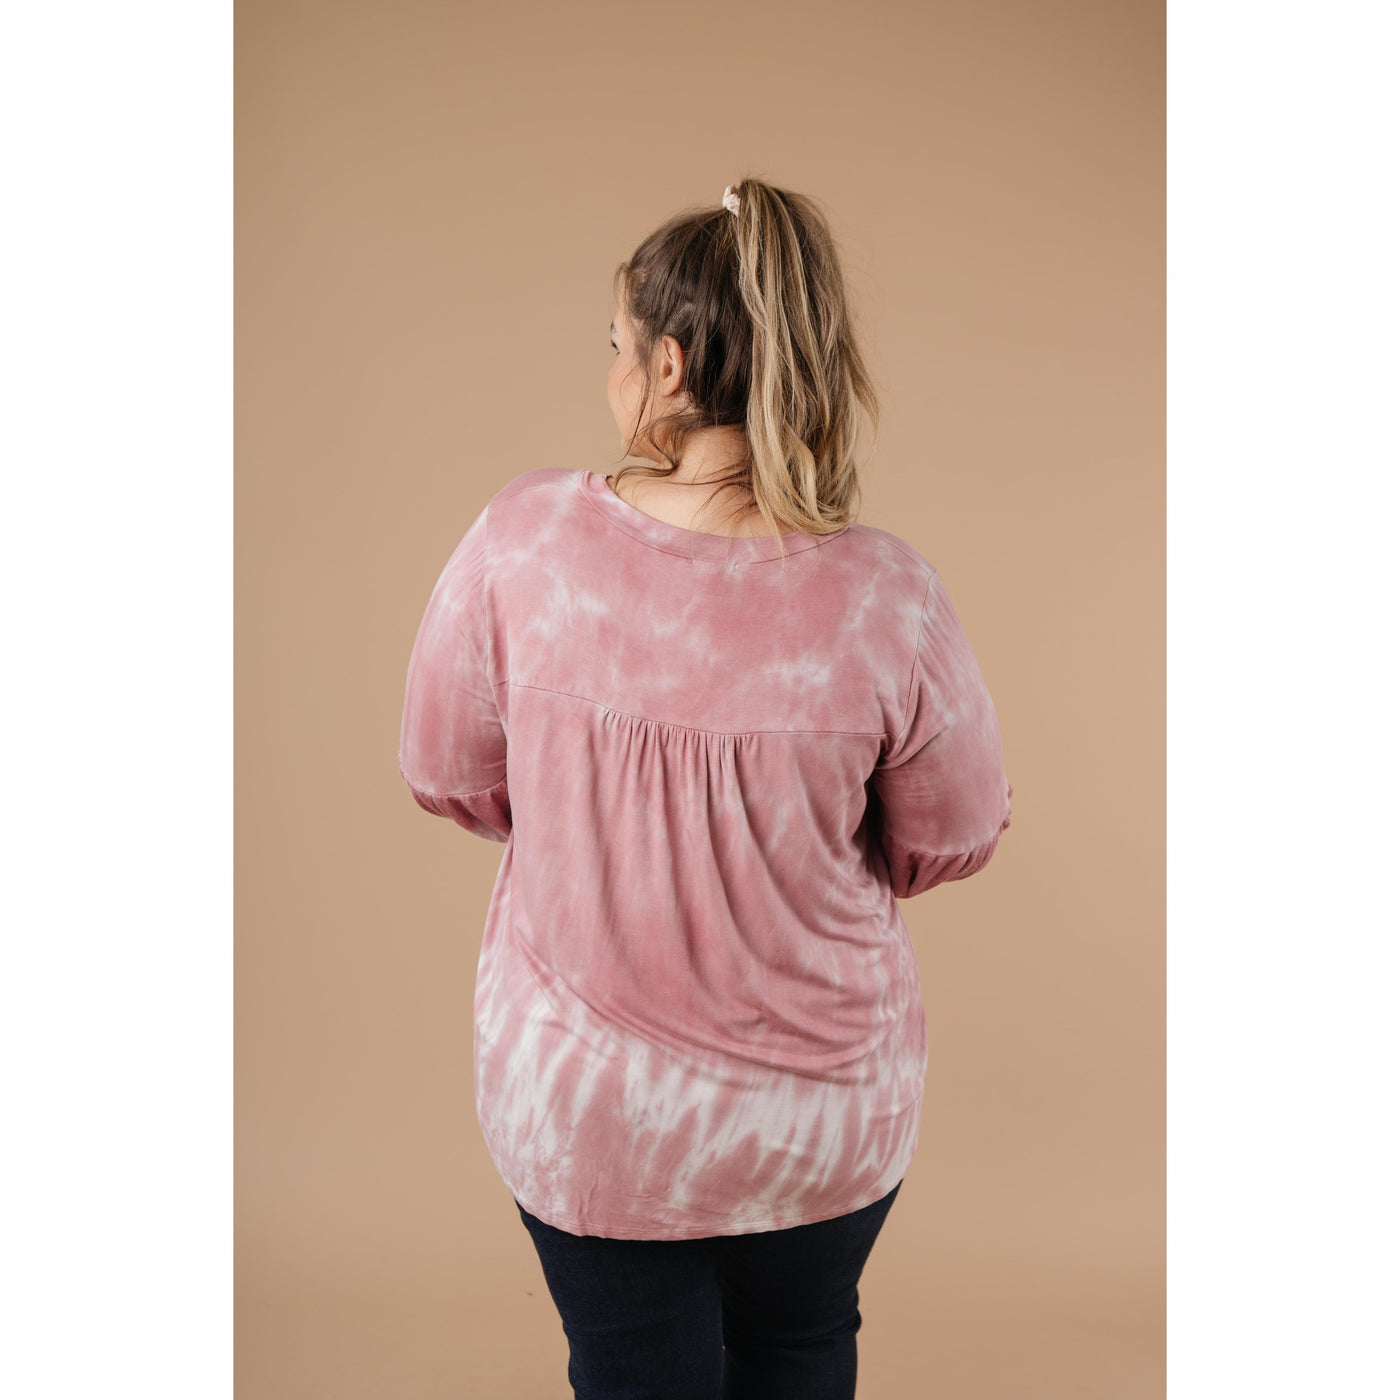 Marvelous Mauve Tie Dye V Neck-Womens-Graceful & Chic Boutique, Family Clothing Store in Waxahachie, Texas